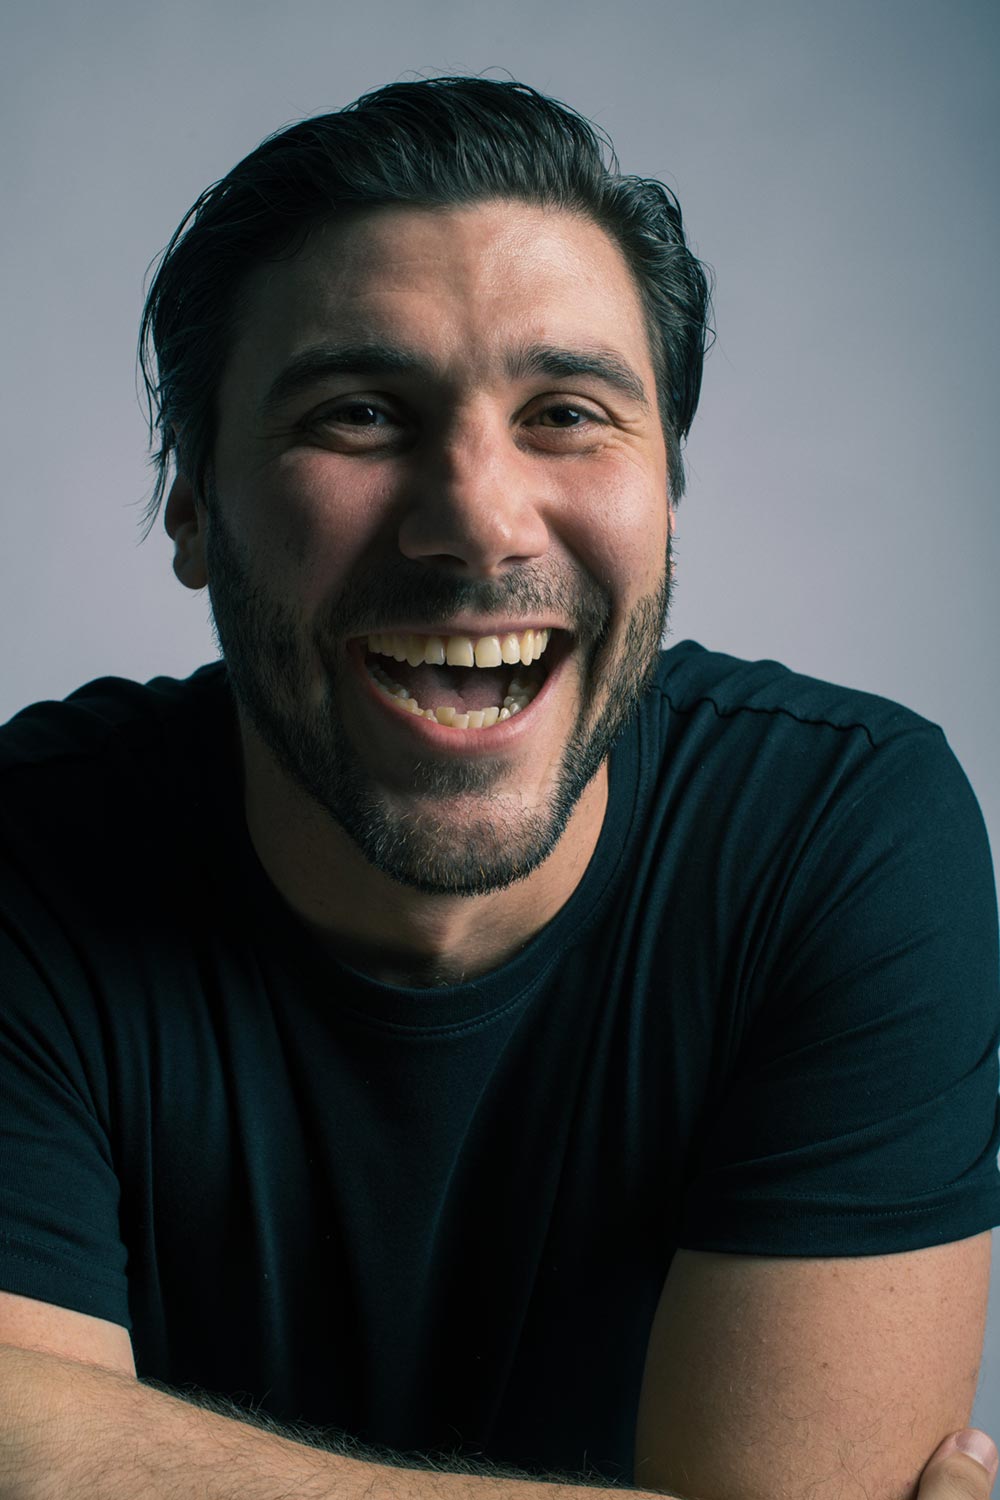 A headshot of a man wearing a black t-shirt, laughing and looking at the camera